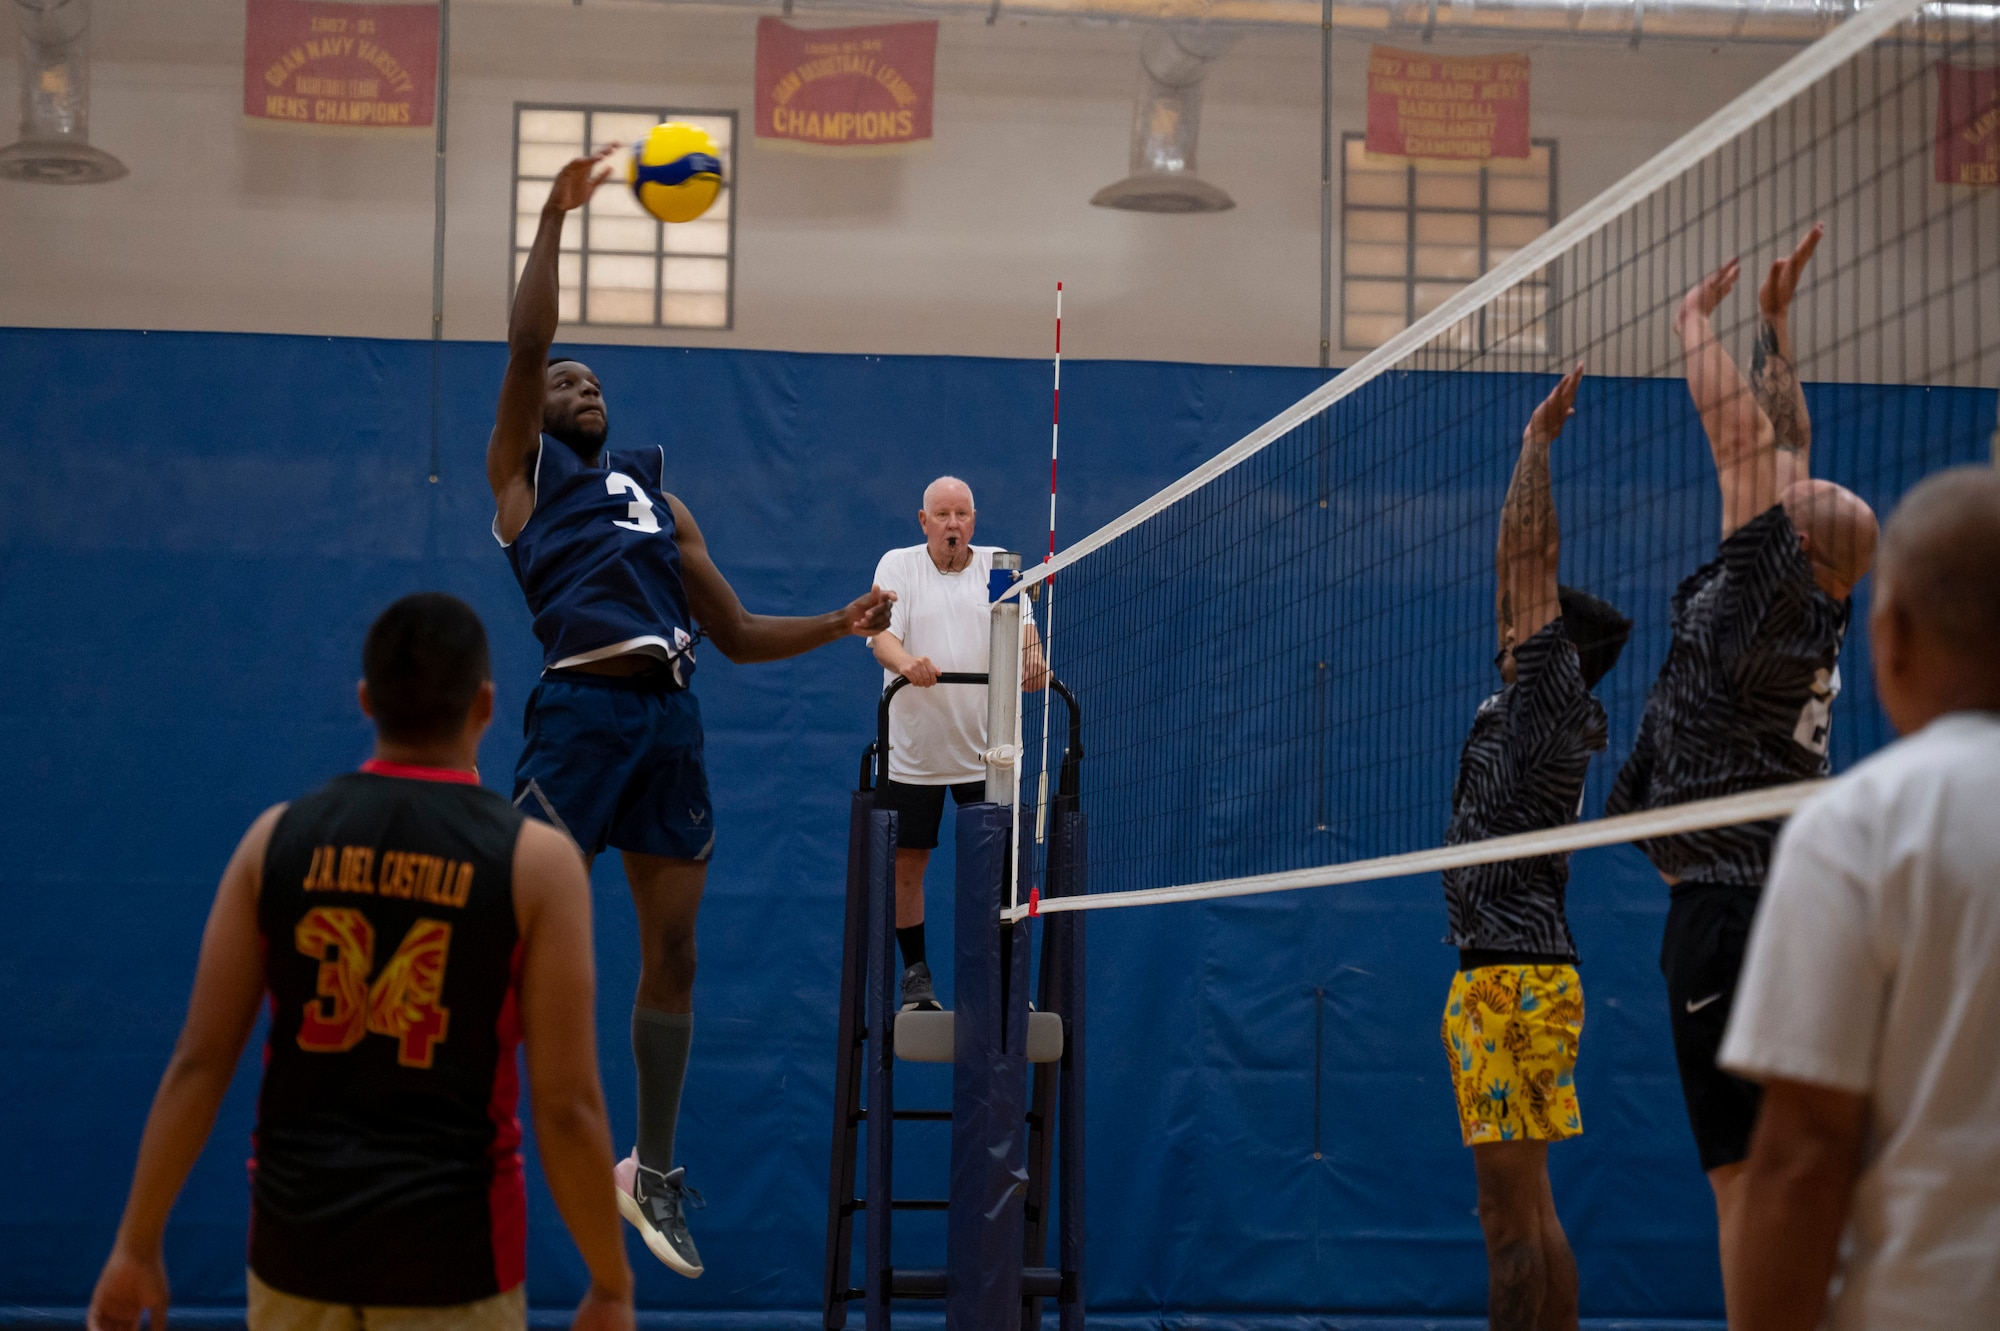 U.S. Air Force Senior Airman Kierhon Wiley, a member of the Civil Engineer Squadron’s intramural volleyball team, hits the ball during the championship game on Andersen Air Force Base, Guam, Oct. 26, 2023. Andersen’s intramural volleyball league ended in a climactic final game between the Security Forces Squadron and CES. The game ended with SFS being named the champions. (U.S. Air Force photo by Airman 1st Class Spencer Perkins)